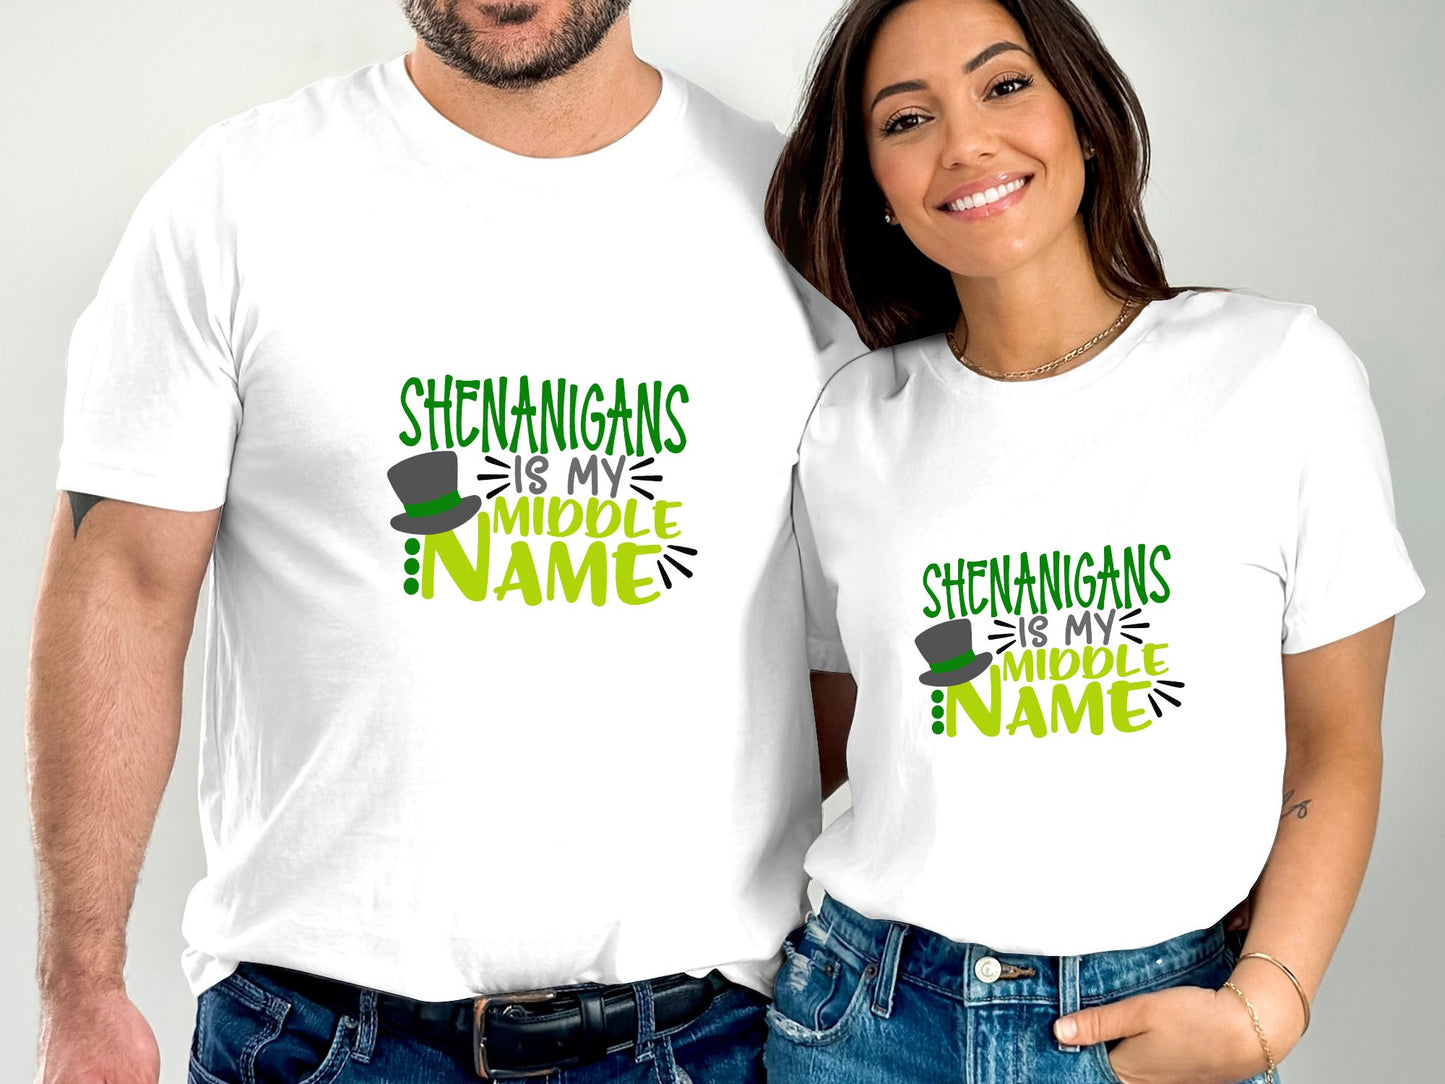 Shenanigans is My Middle Name (St. Patrick's Day T-shirt)